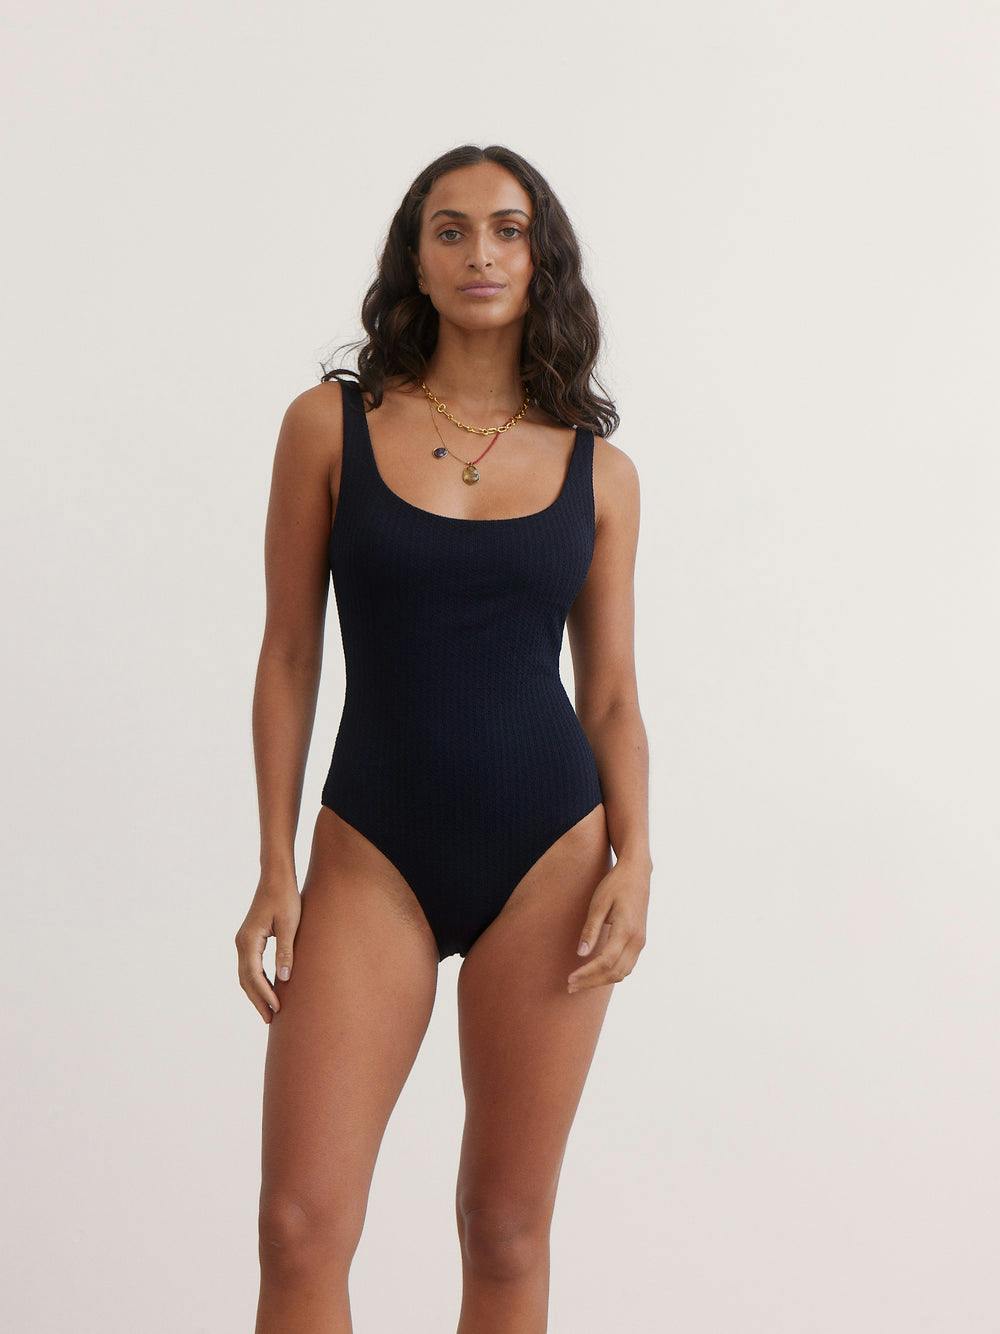 ra theo scoop one piece, a product by Boteh